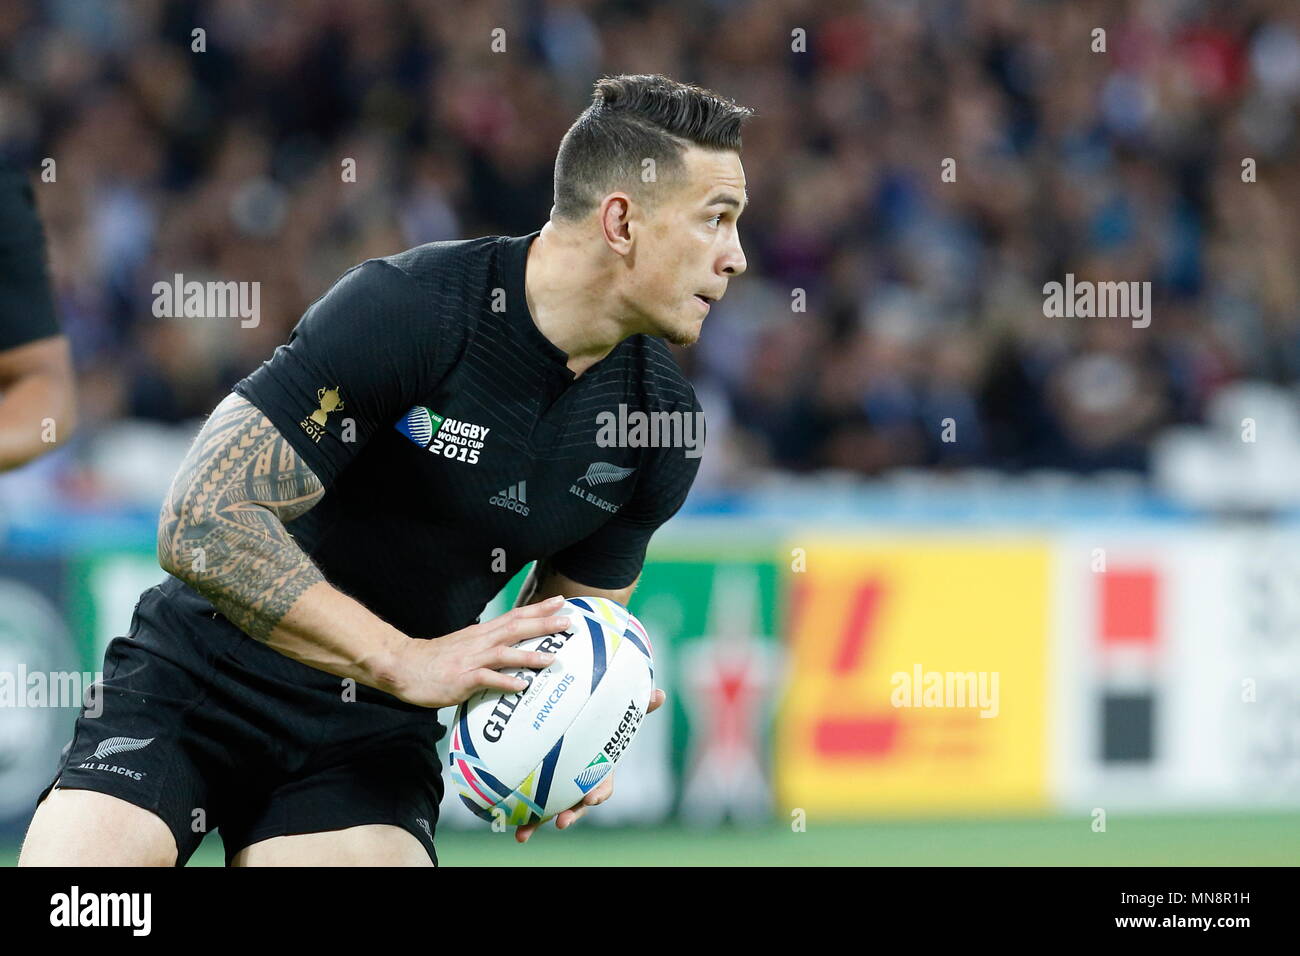 Sonny Bill Williams of NZW All Blacks during the IRB RWC 2015 match between New Zealand All Blacks v Namibia- Pool C Match 12 at The Stadium, Queen Elizabeth Olympic Park. London, England. 24 September 2015 Stock Photo